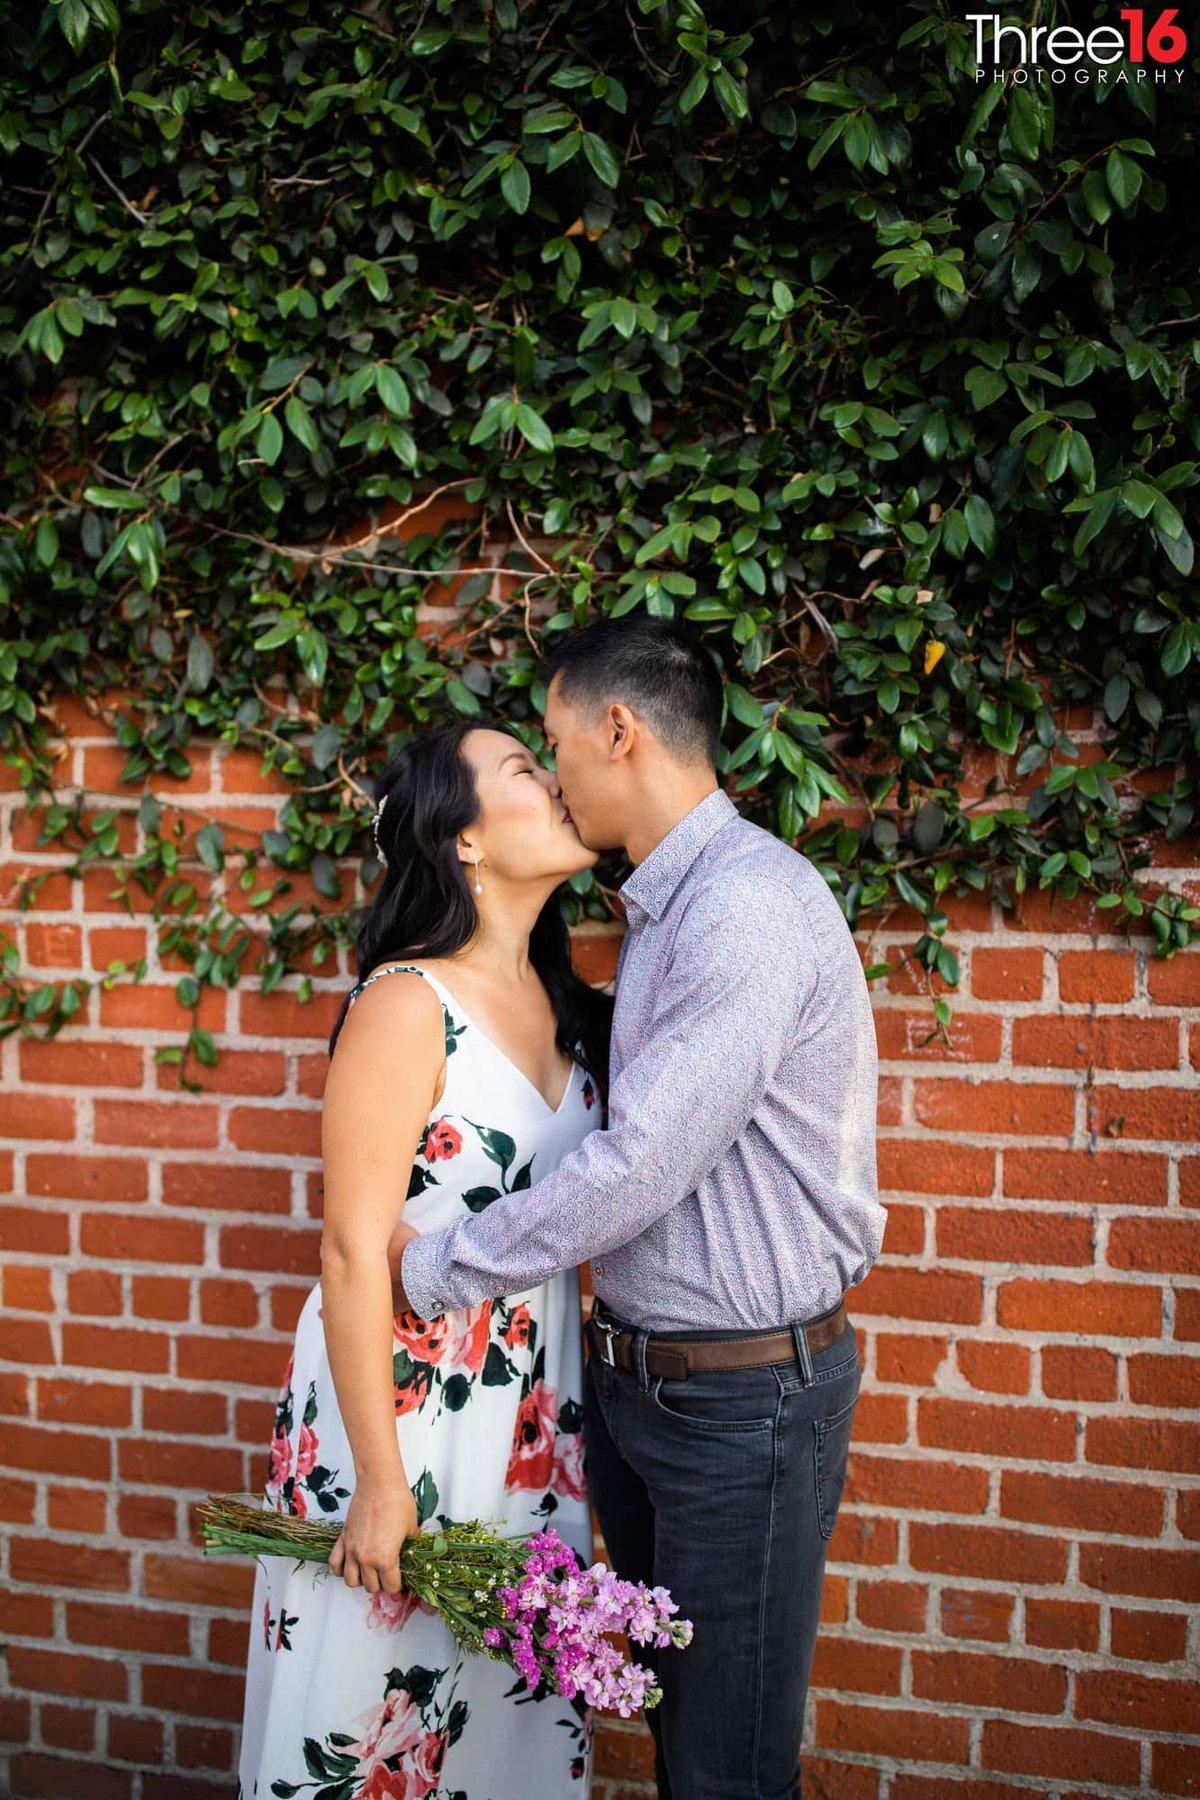 Downtown Los Angeles Engagement Photos LA County Weddings Professional